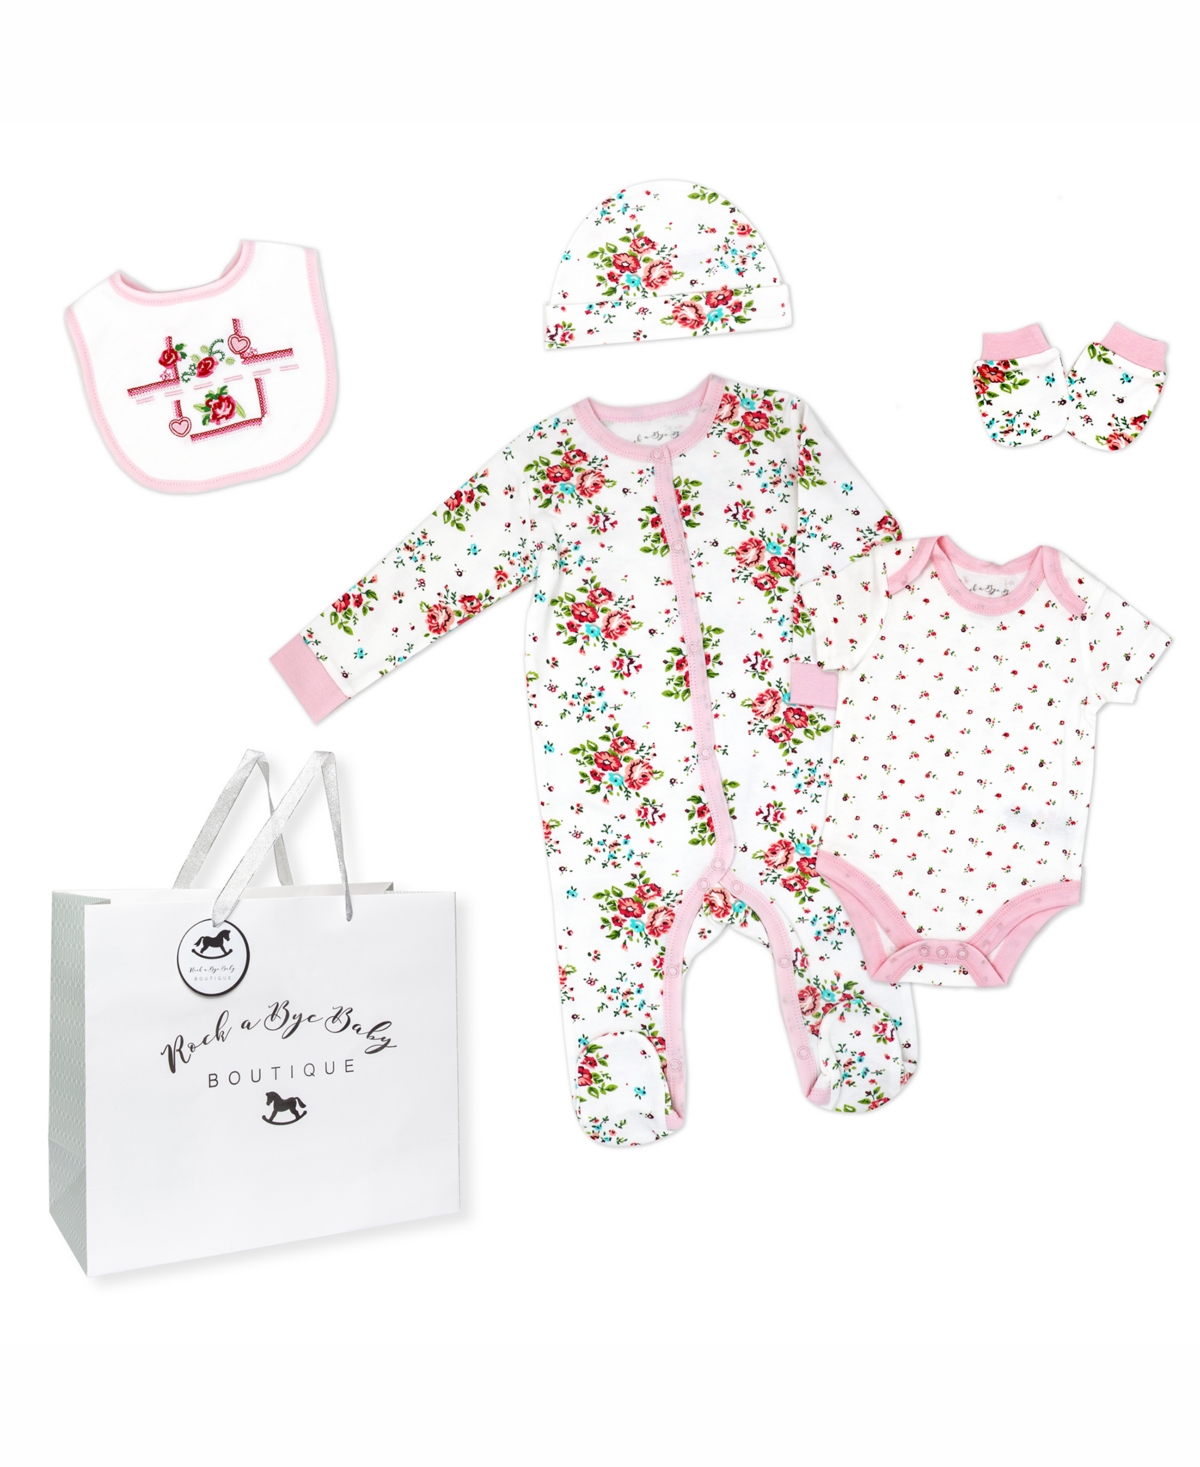 Rock-a-bye Baby Boutique Baby Girls Layette Gift Bag Set In Rose Needlepoint